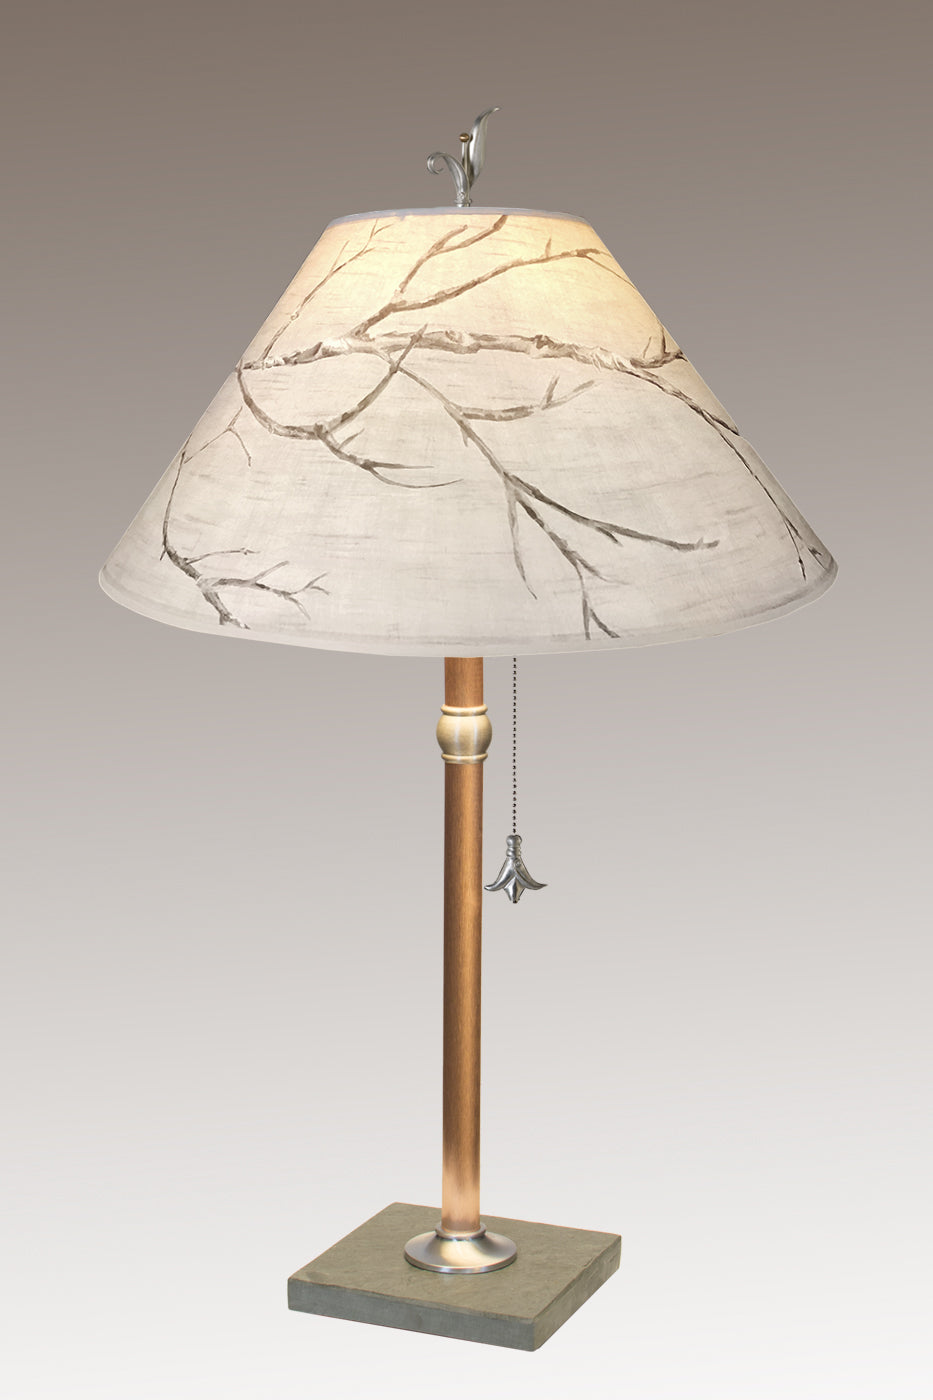 Janna Ugone &amp; Co Table Lamps Copper Table Lamp with Large Conical Shade in Sweeping Branch